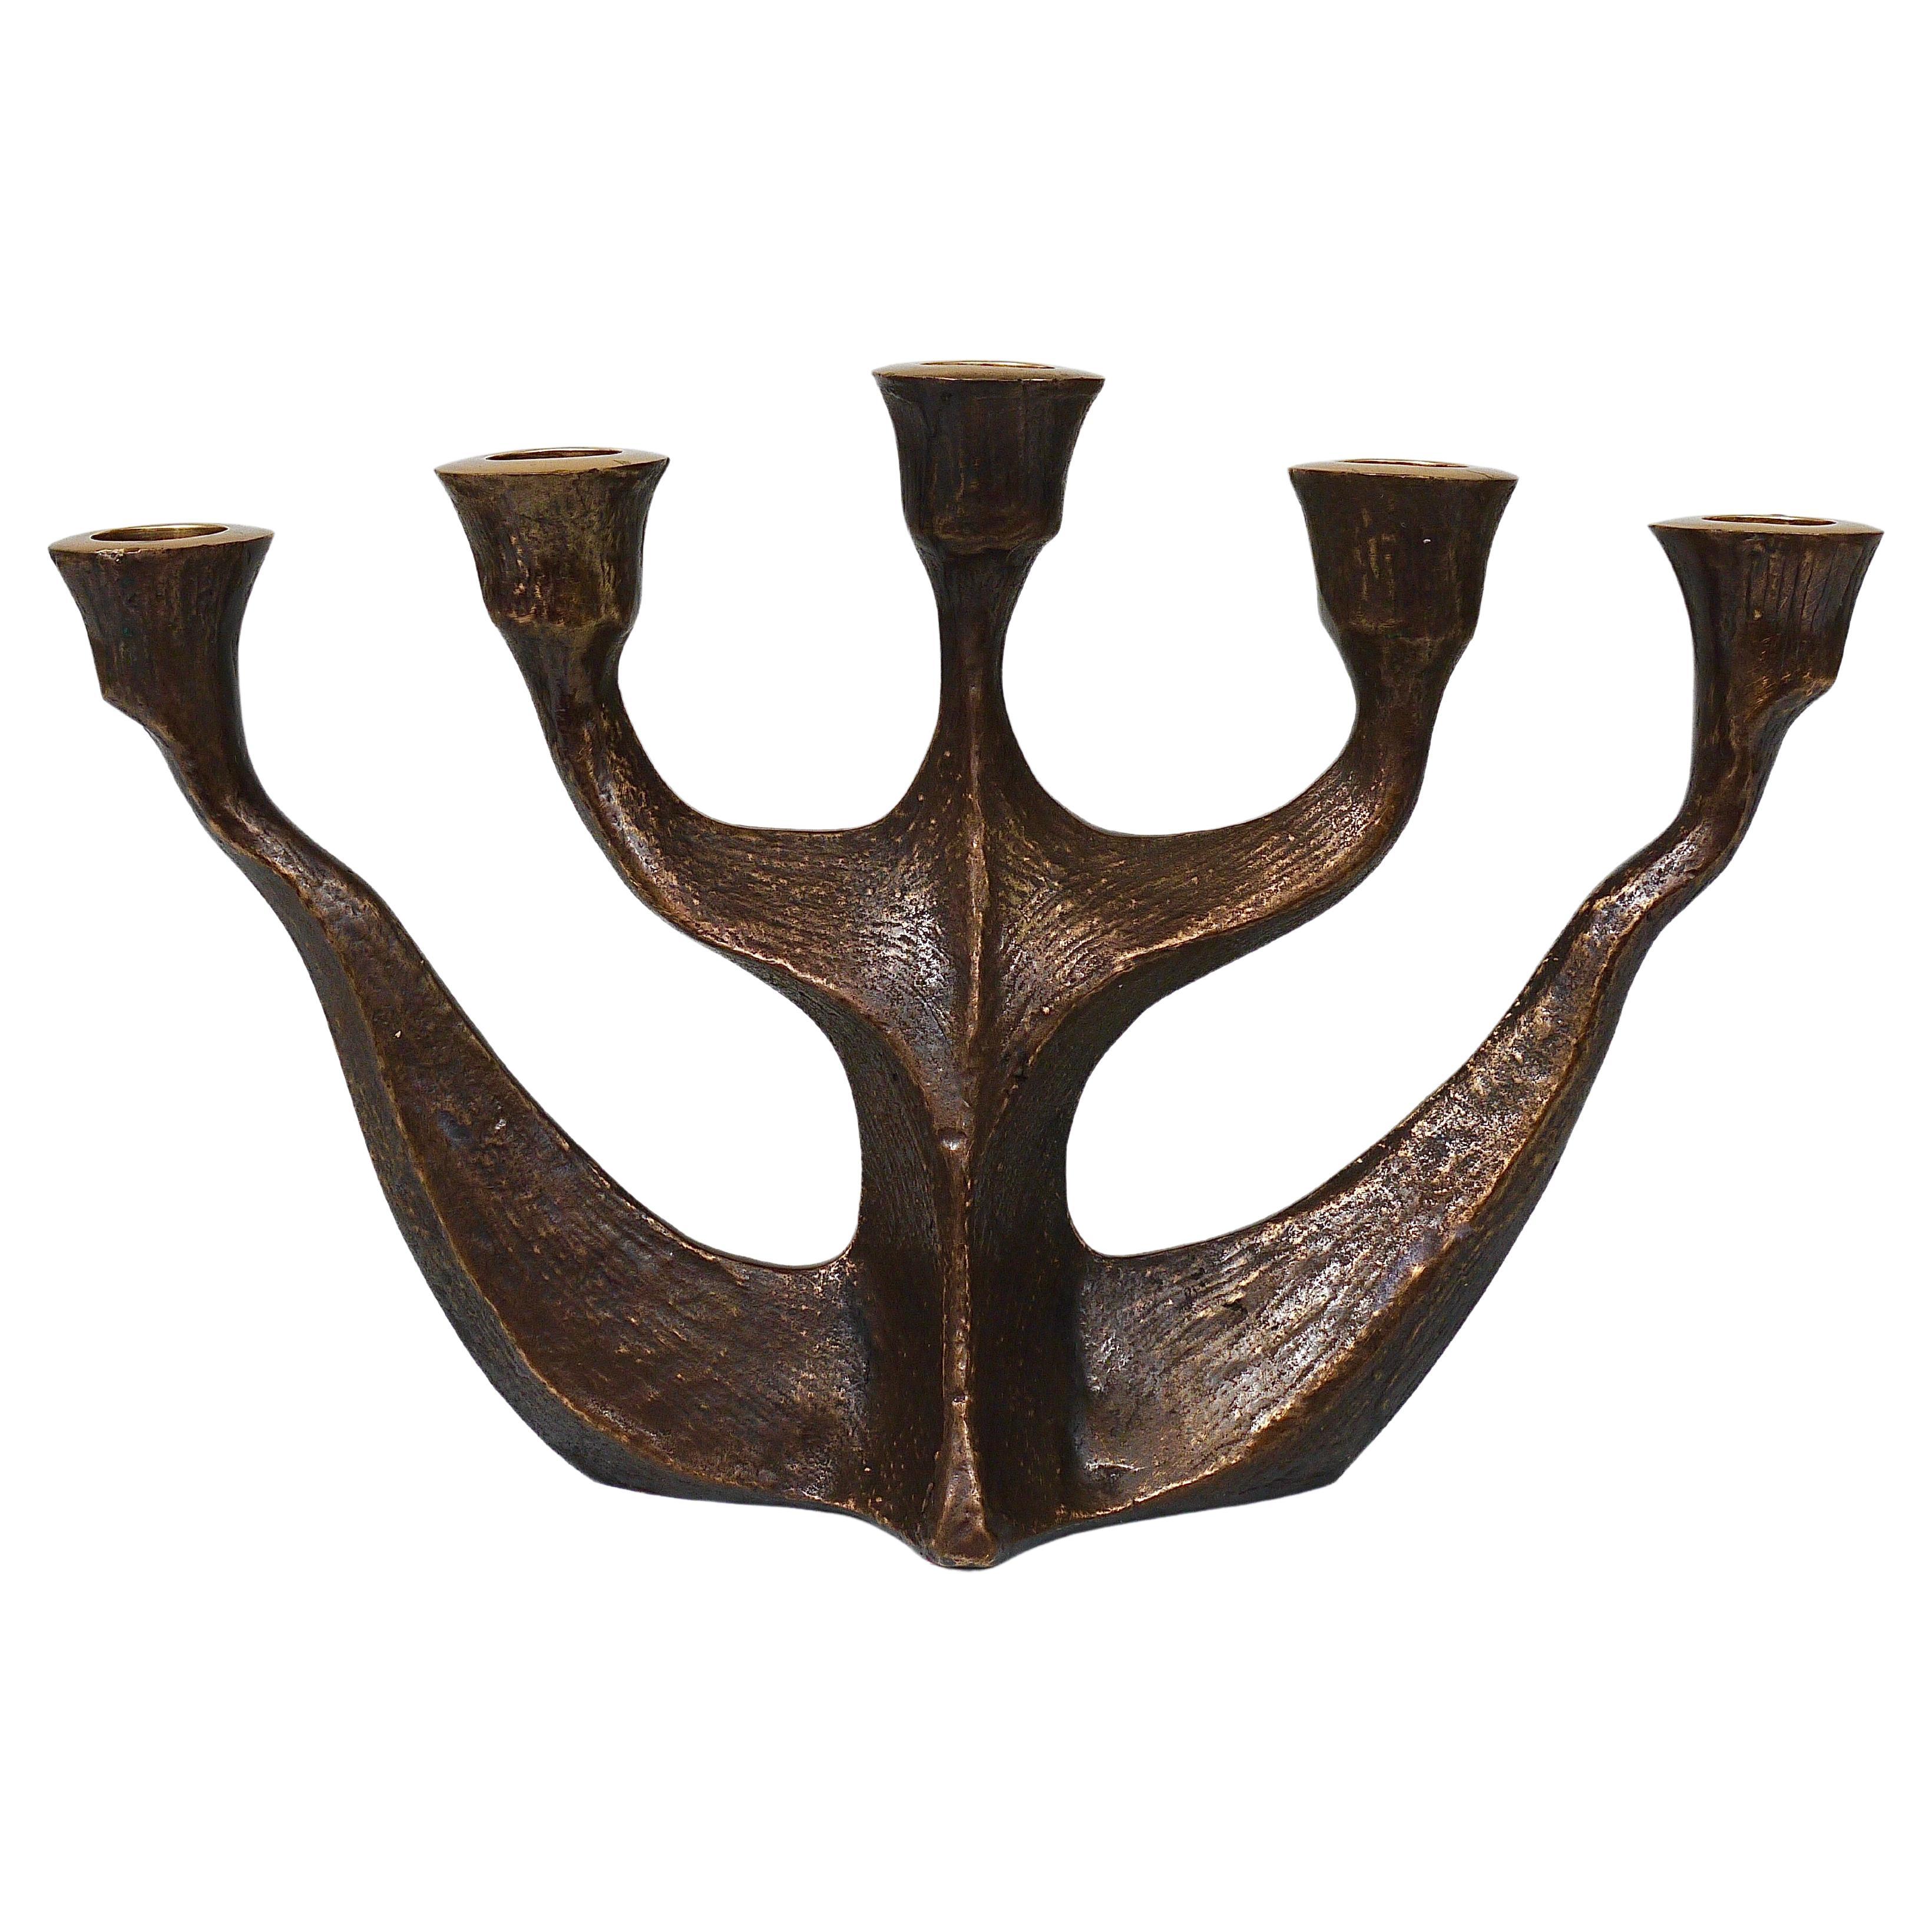 Up to Two Midcentury Brutalist Bronze Candleholders by Michael Harjes, 1960s For Sale